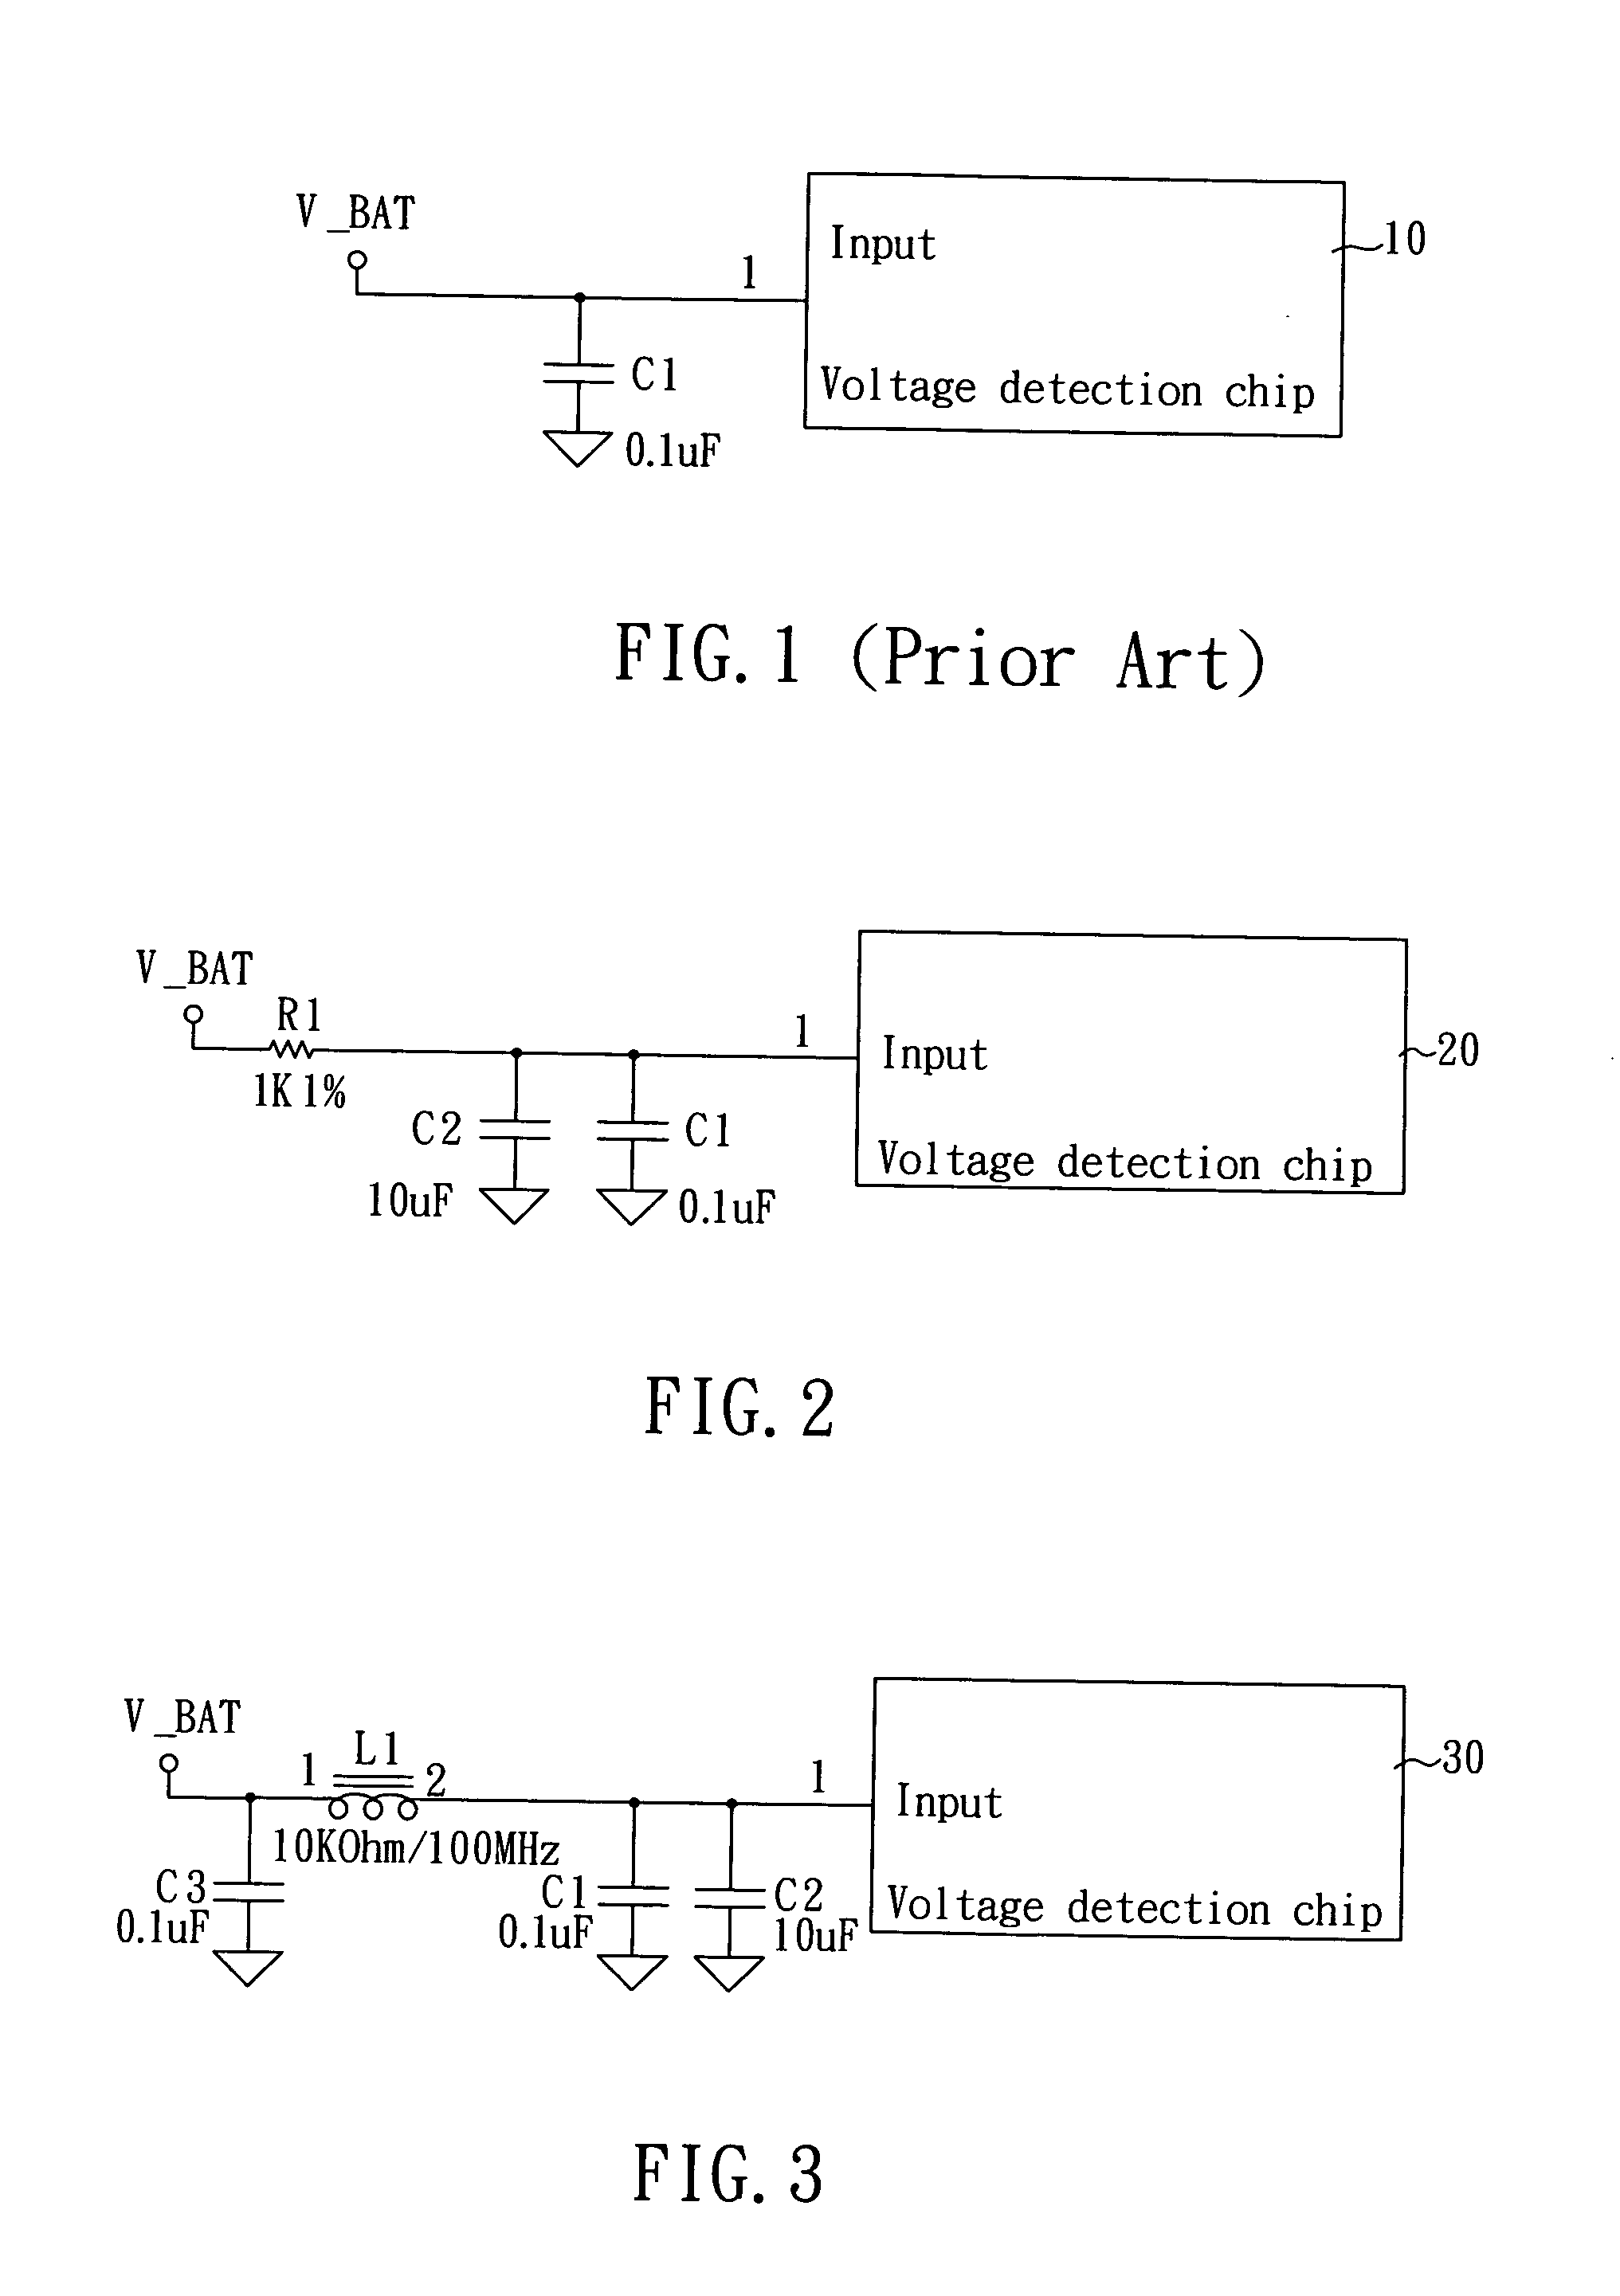 System for detecting battery voltage with high precision